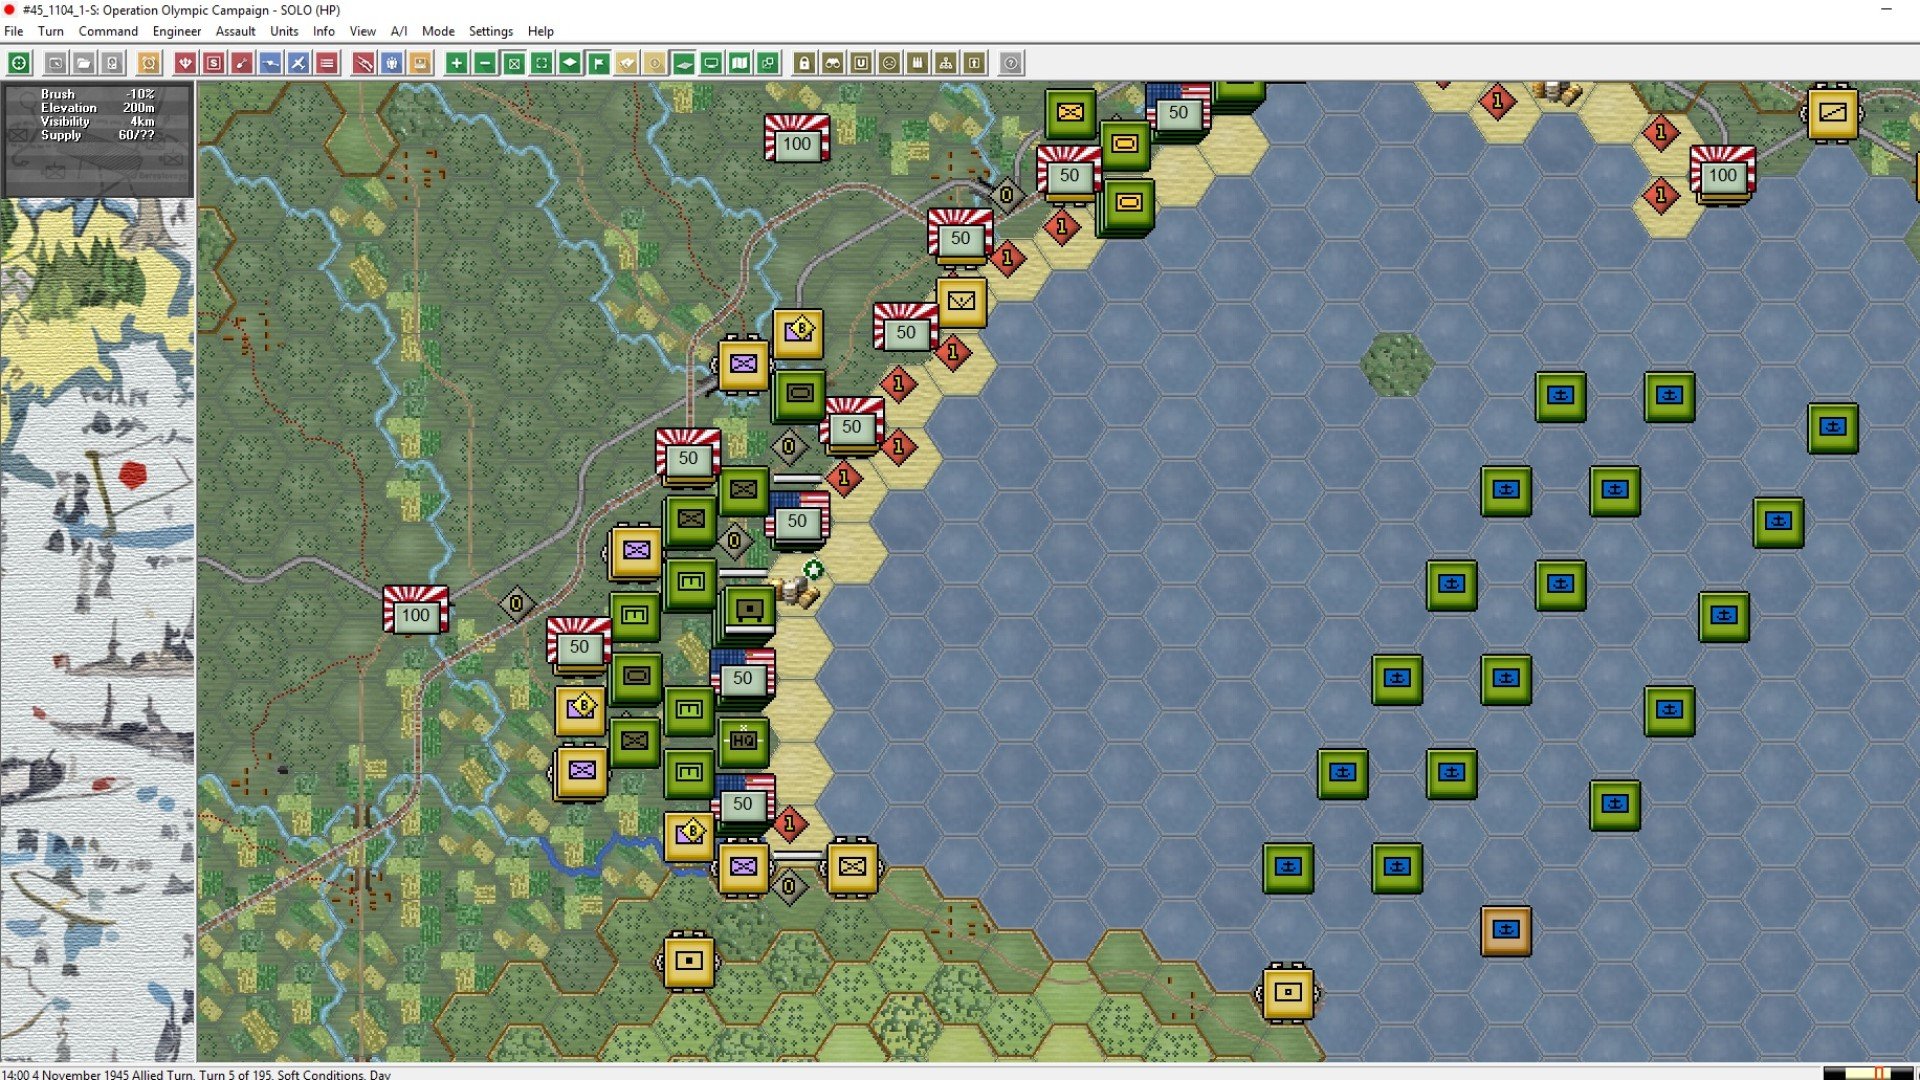 Best WW2 games - screenshot from Panzer Campaigns Japan 1945 showing a coastal map and naval units